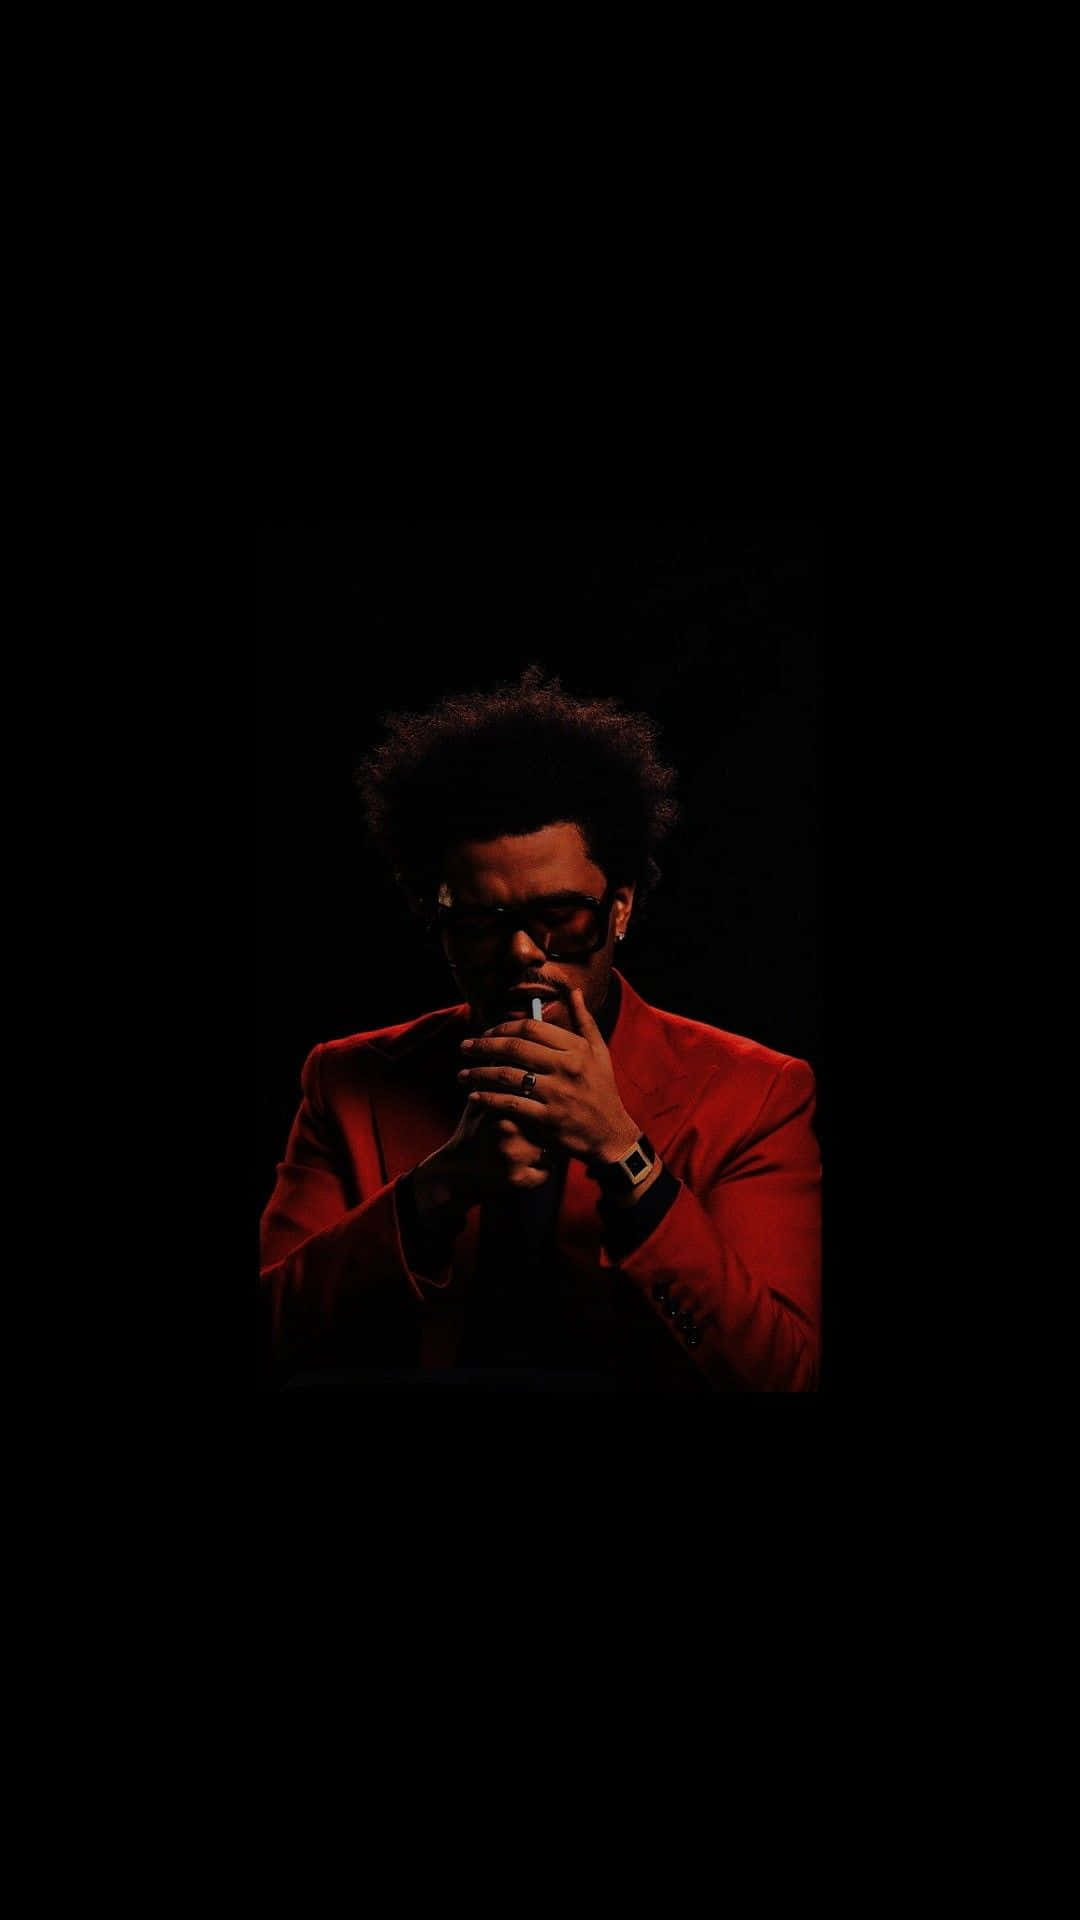 After Hours The Weeknd  The weeknd poster The weeknd The weeknd  wallpaper iphone